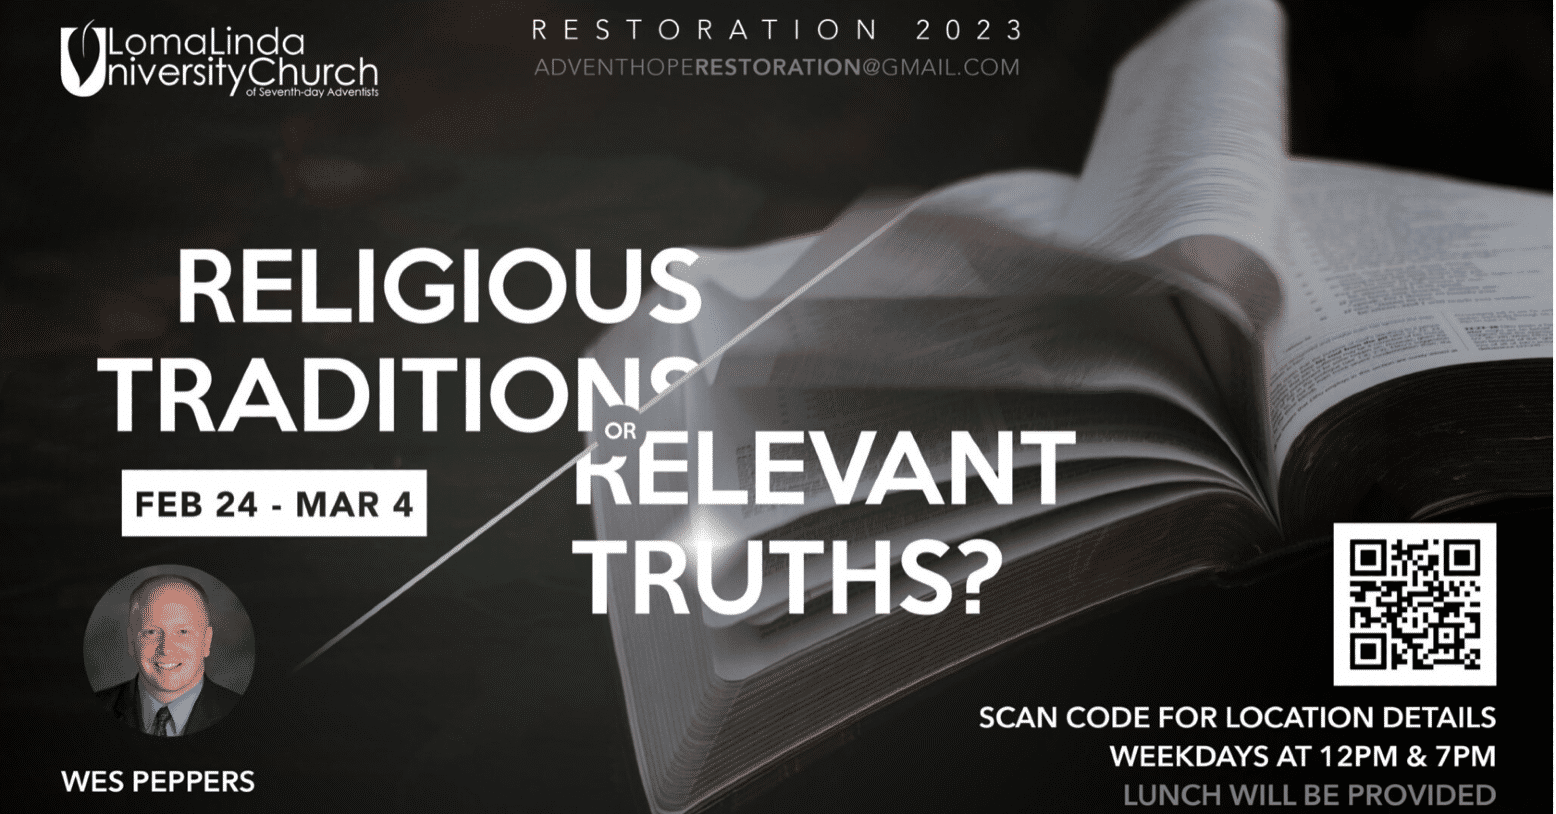 Restoration 2023: Religious Traditions or Relevant Truths?